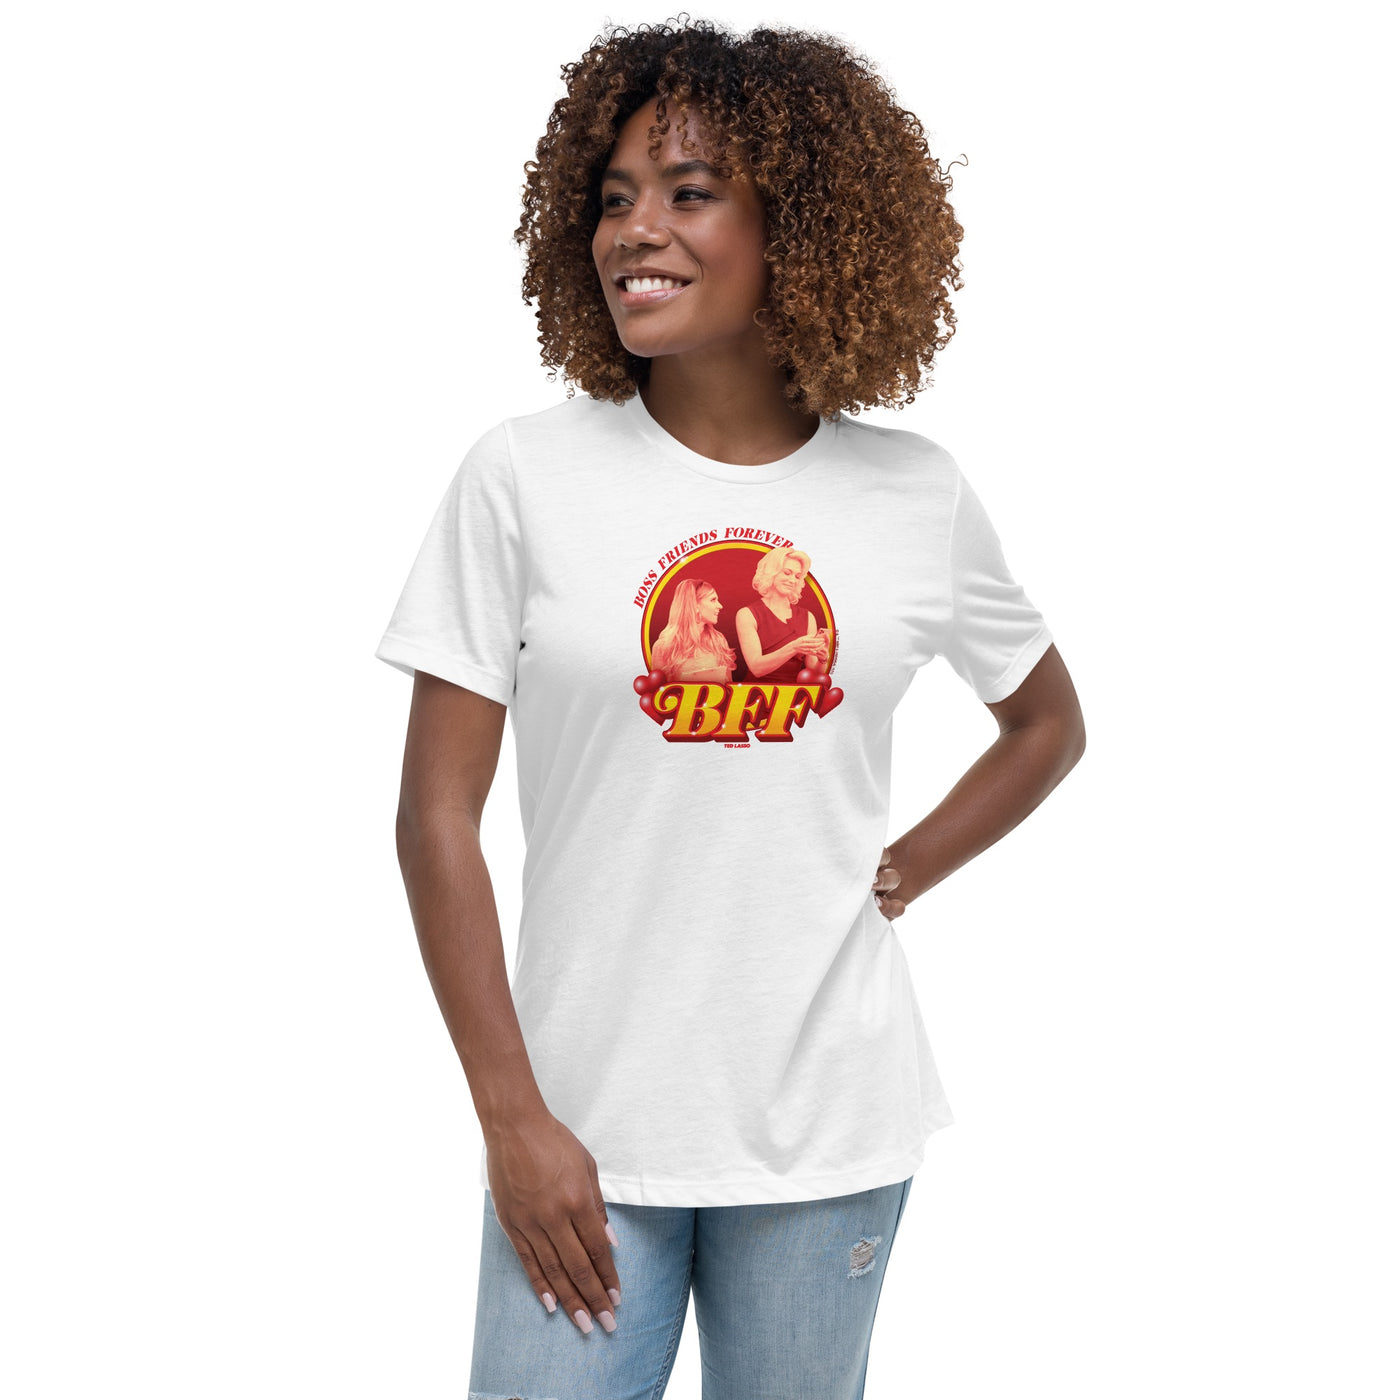 Ted Lasso Boss Friends Forever Woman's Tee